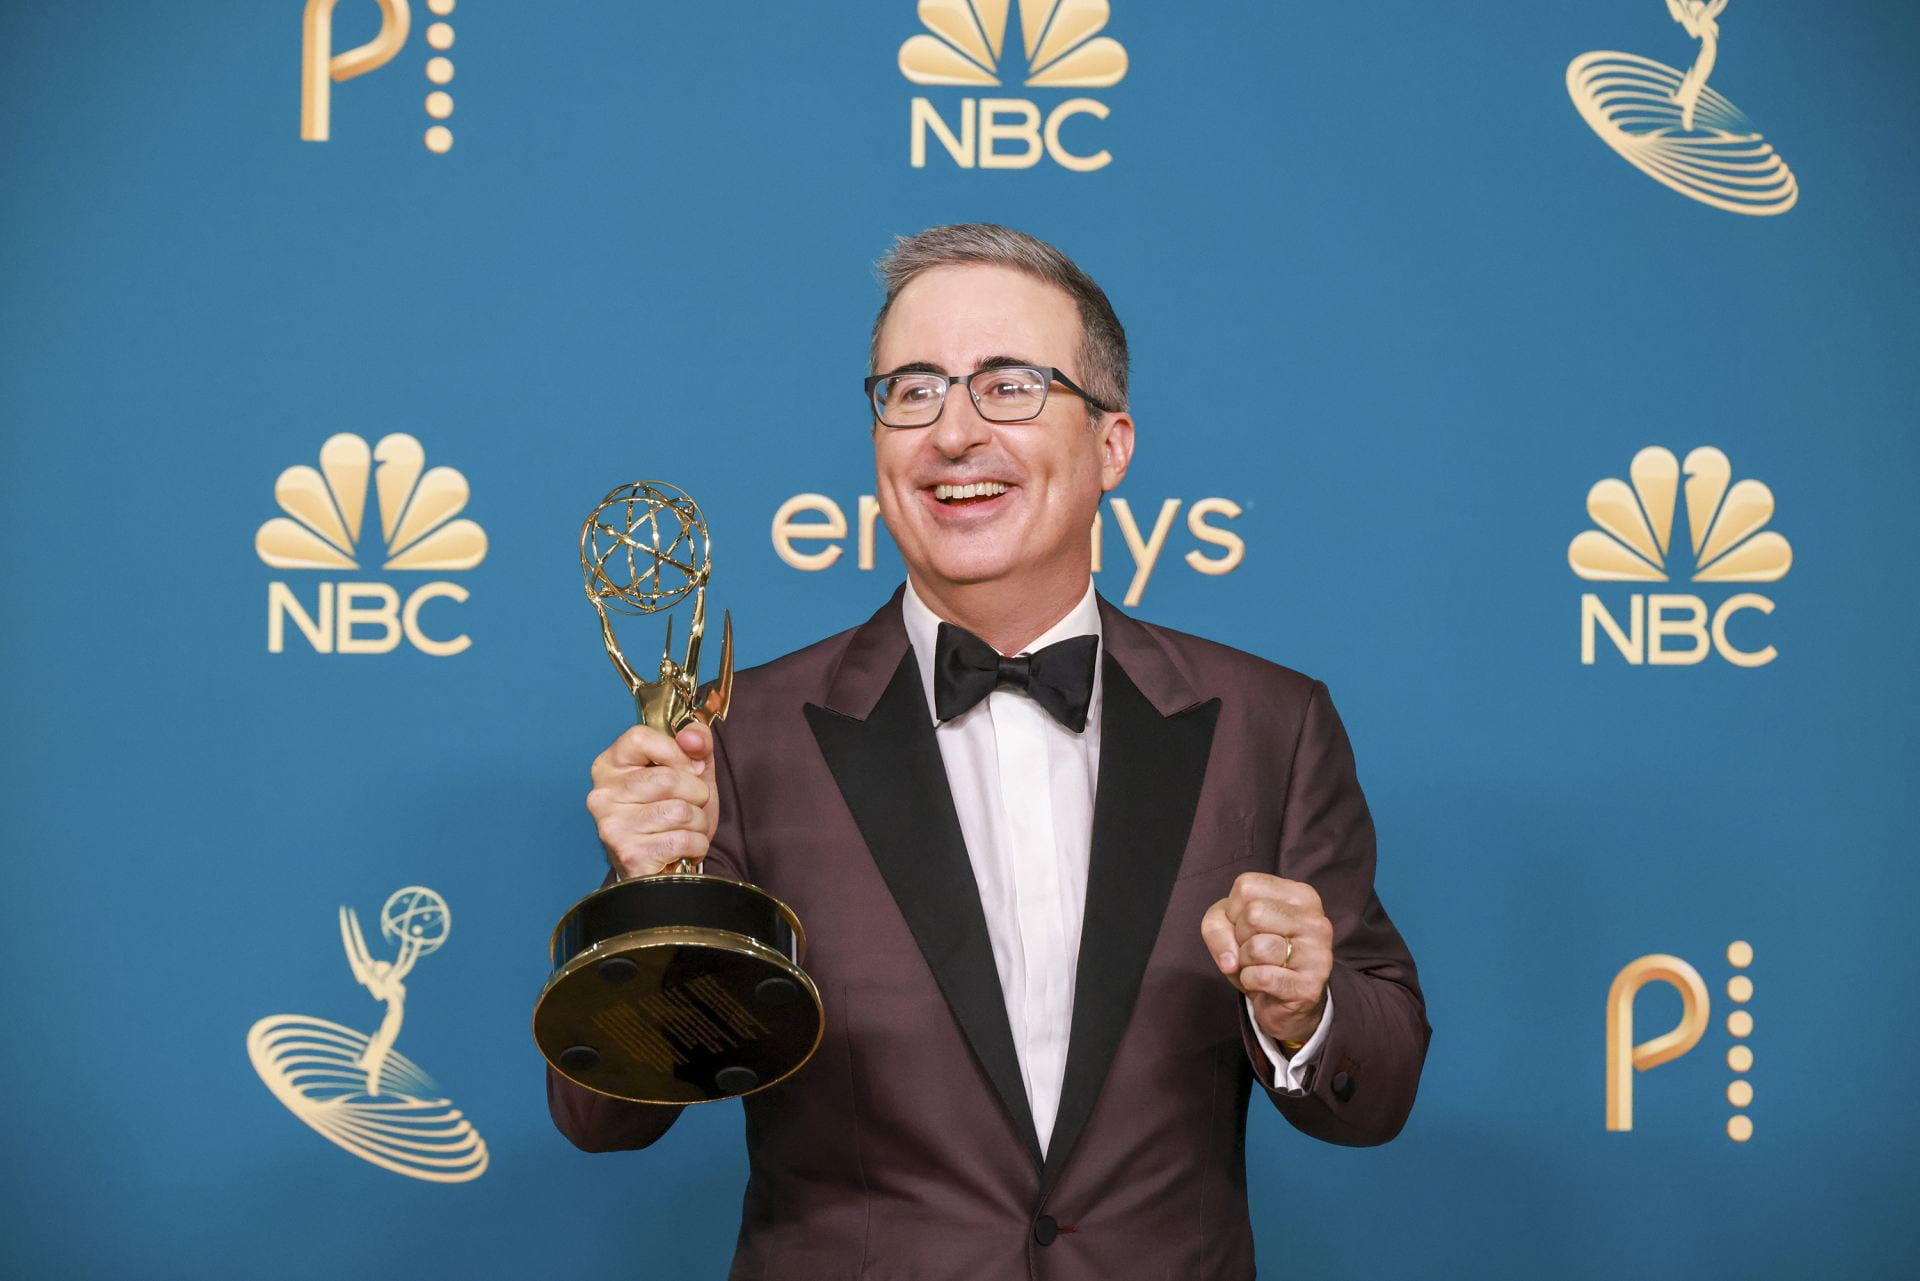 John Oliver at the 74th Primetime Emmy Awards at the Microsoft Theater in Los Angeles on Sept. 12, 2022. (Allen J. Schaben/Los Angeles Times/TNS)